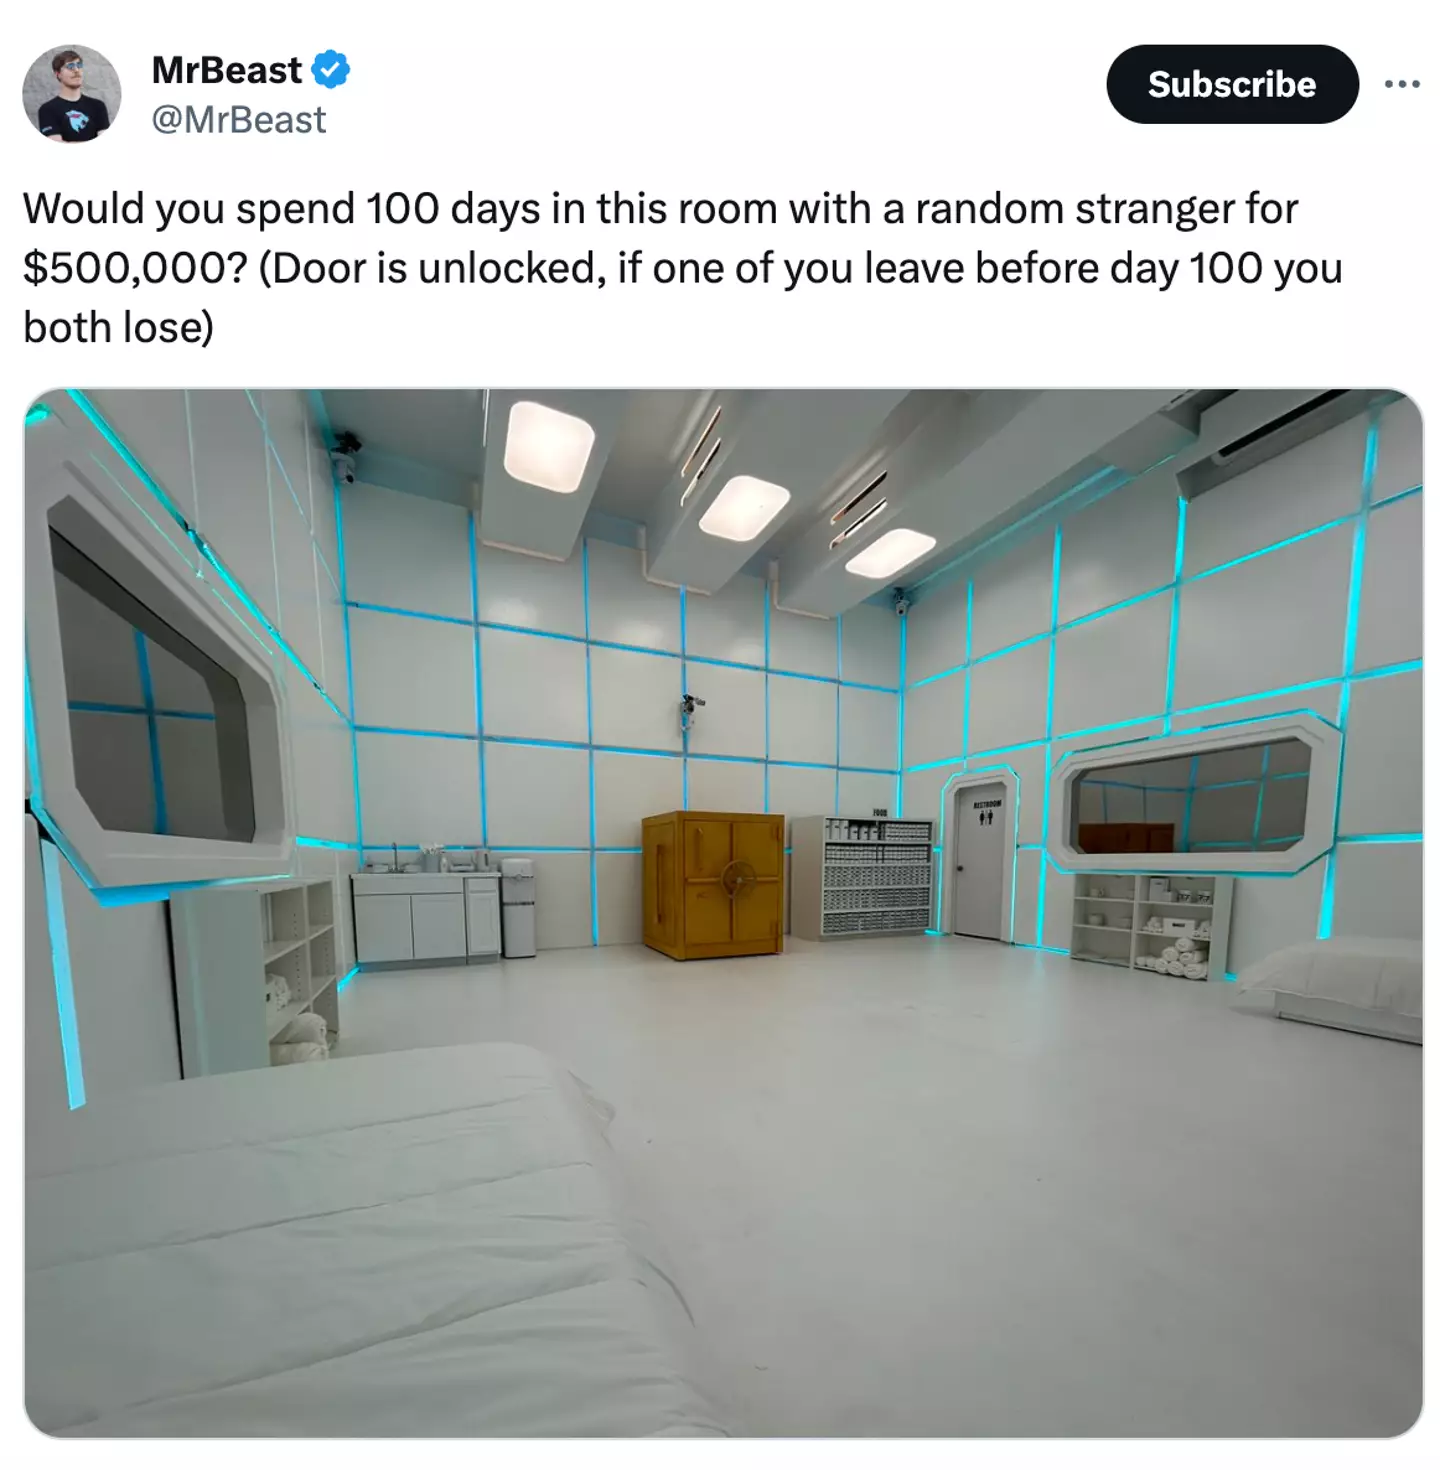 MrBeast shared a picture of the empty room designed for the challenge.